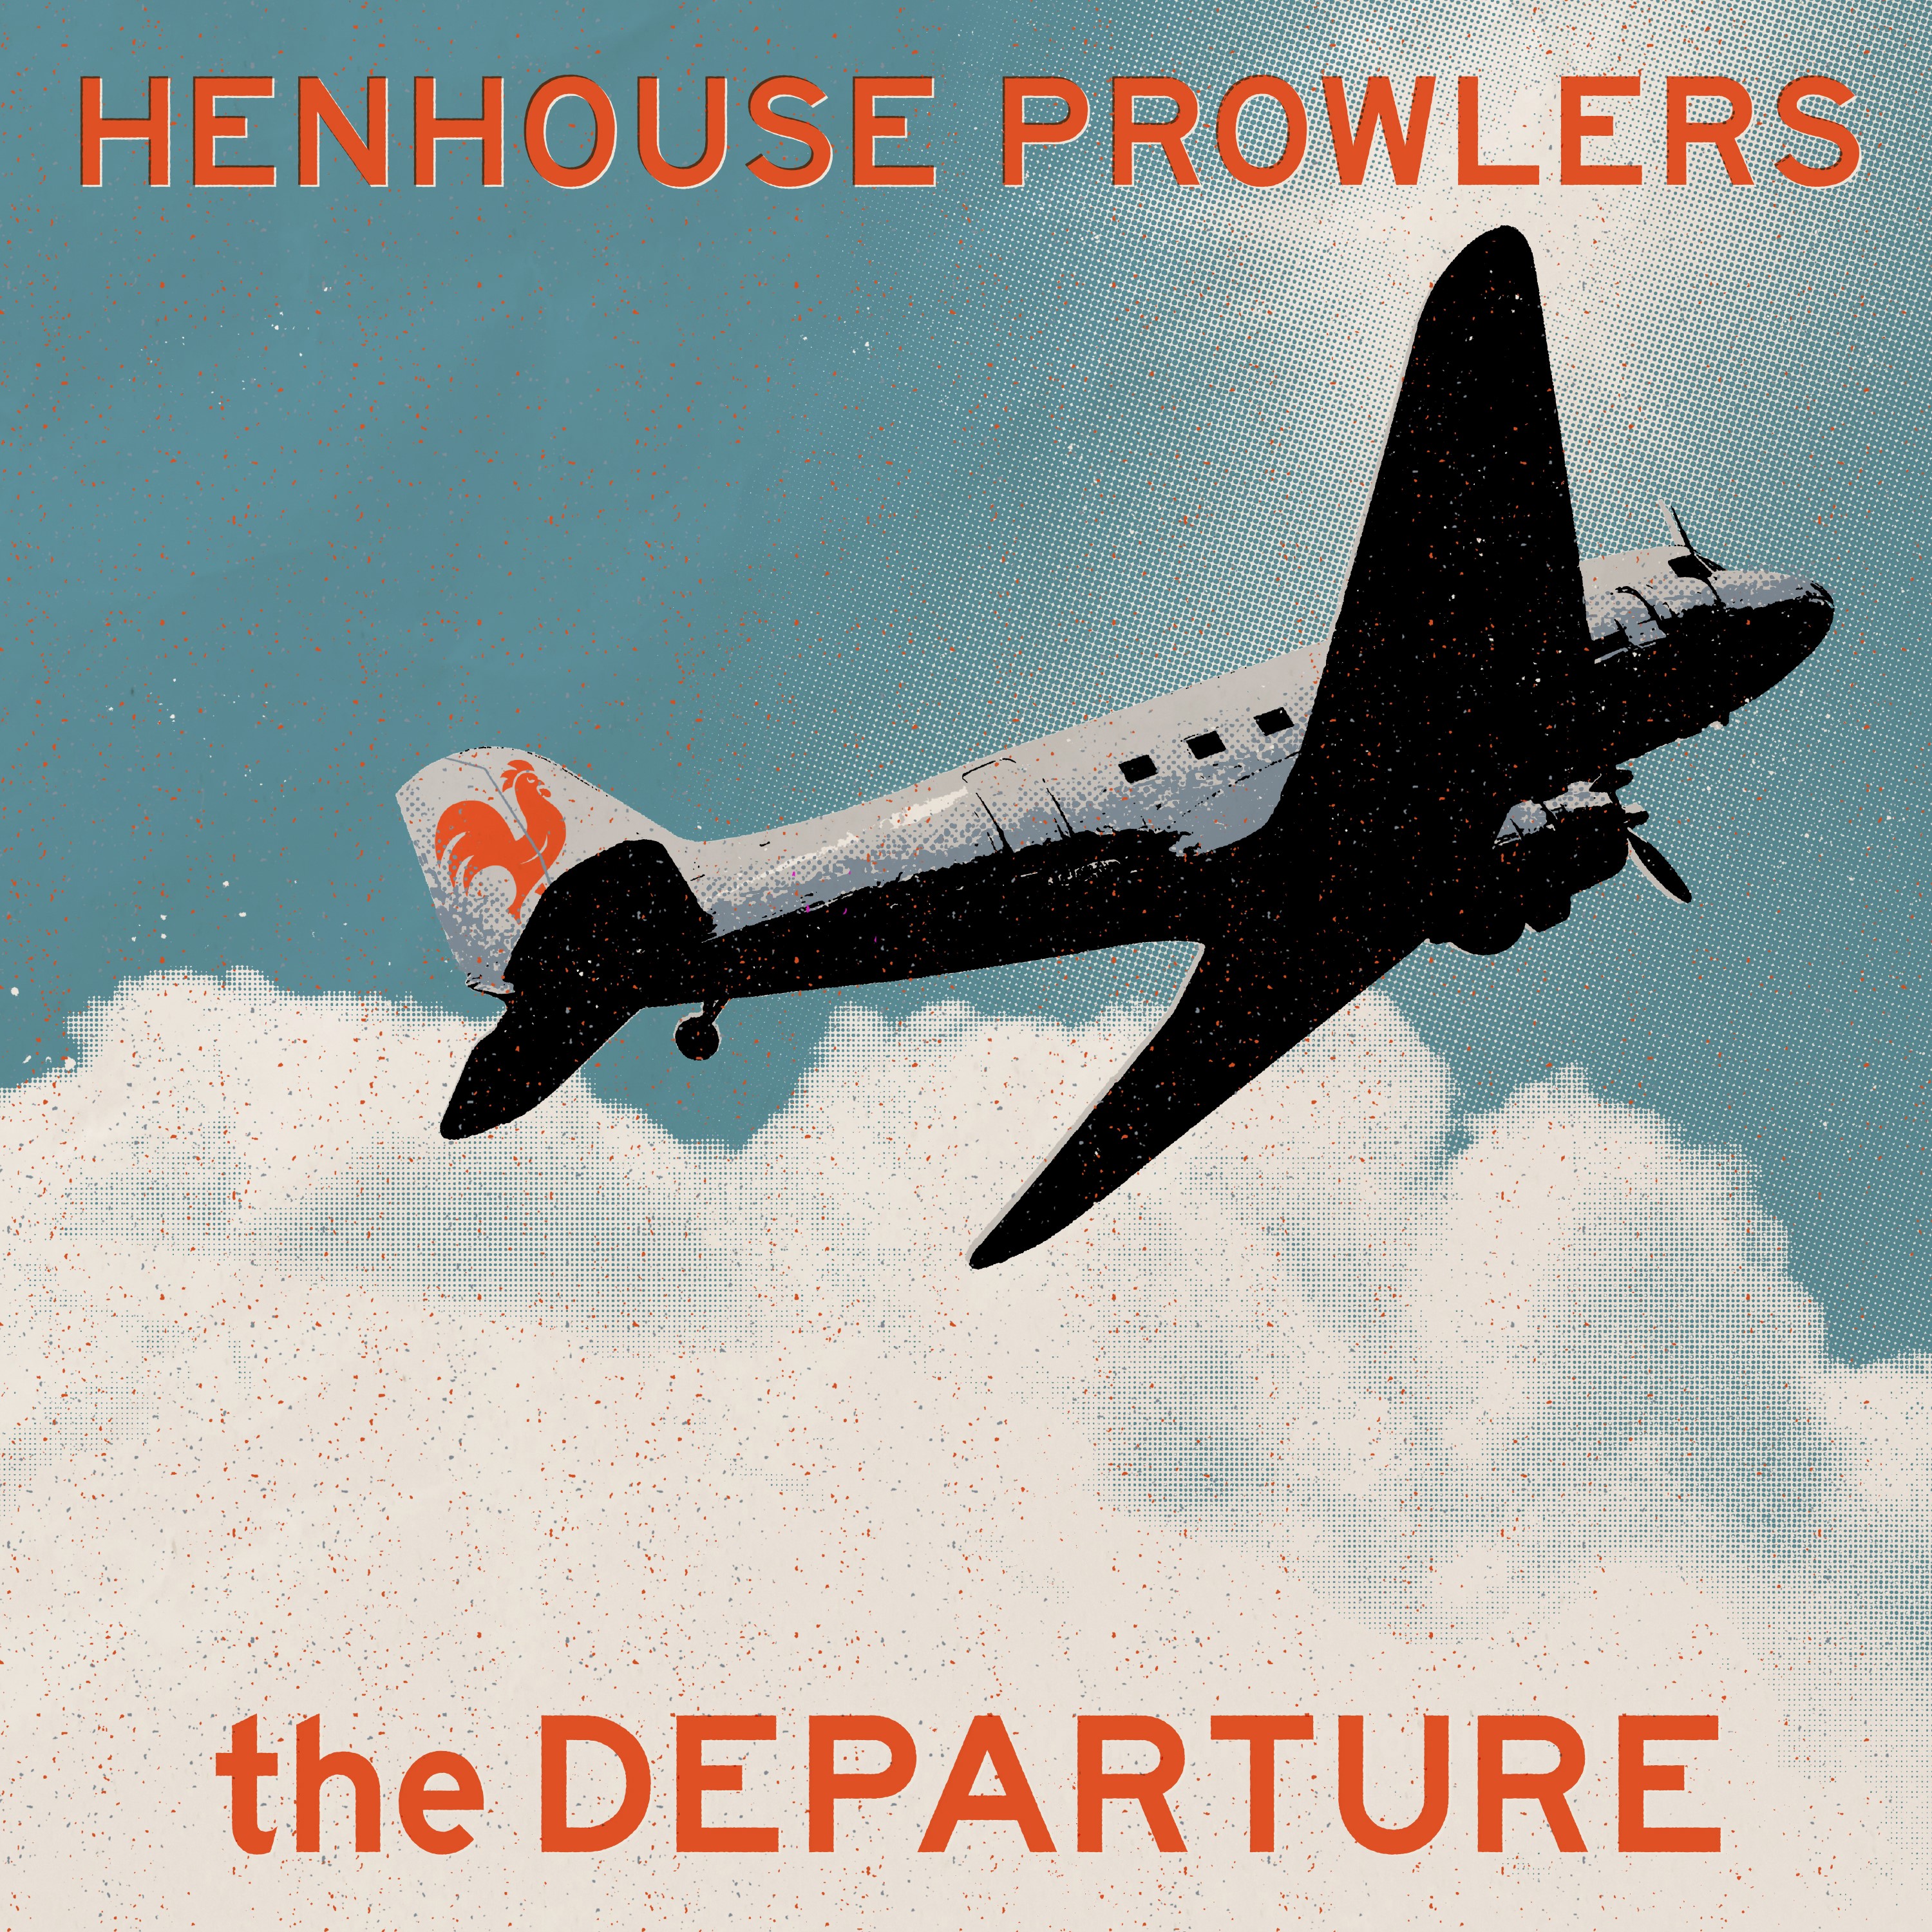 Henhouse Prowlers release their new album The Departure